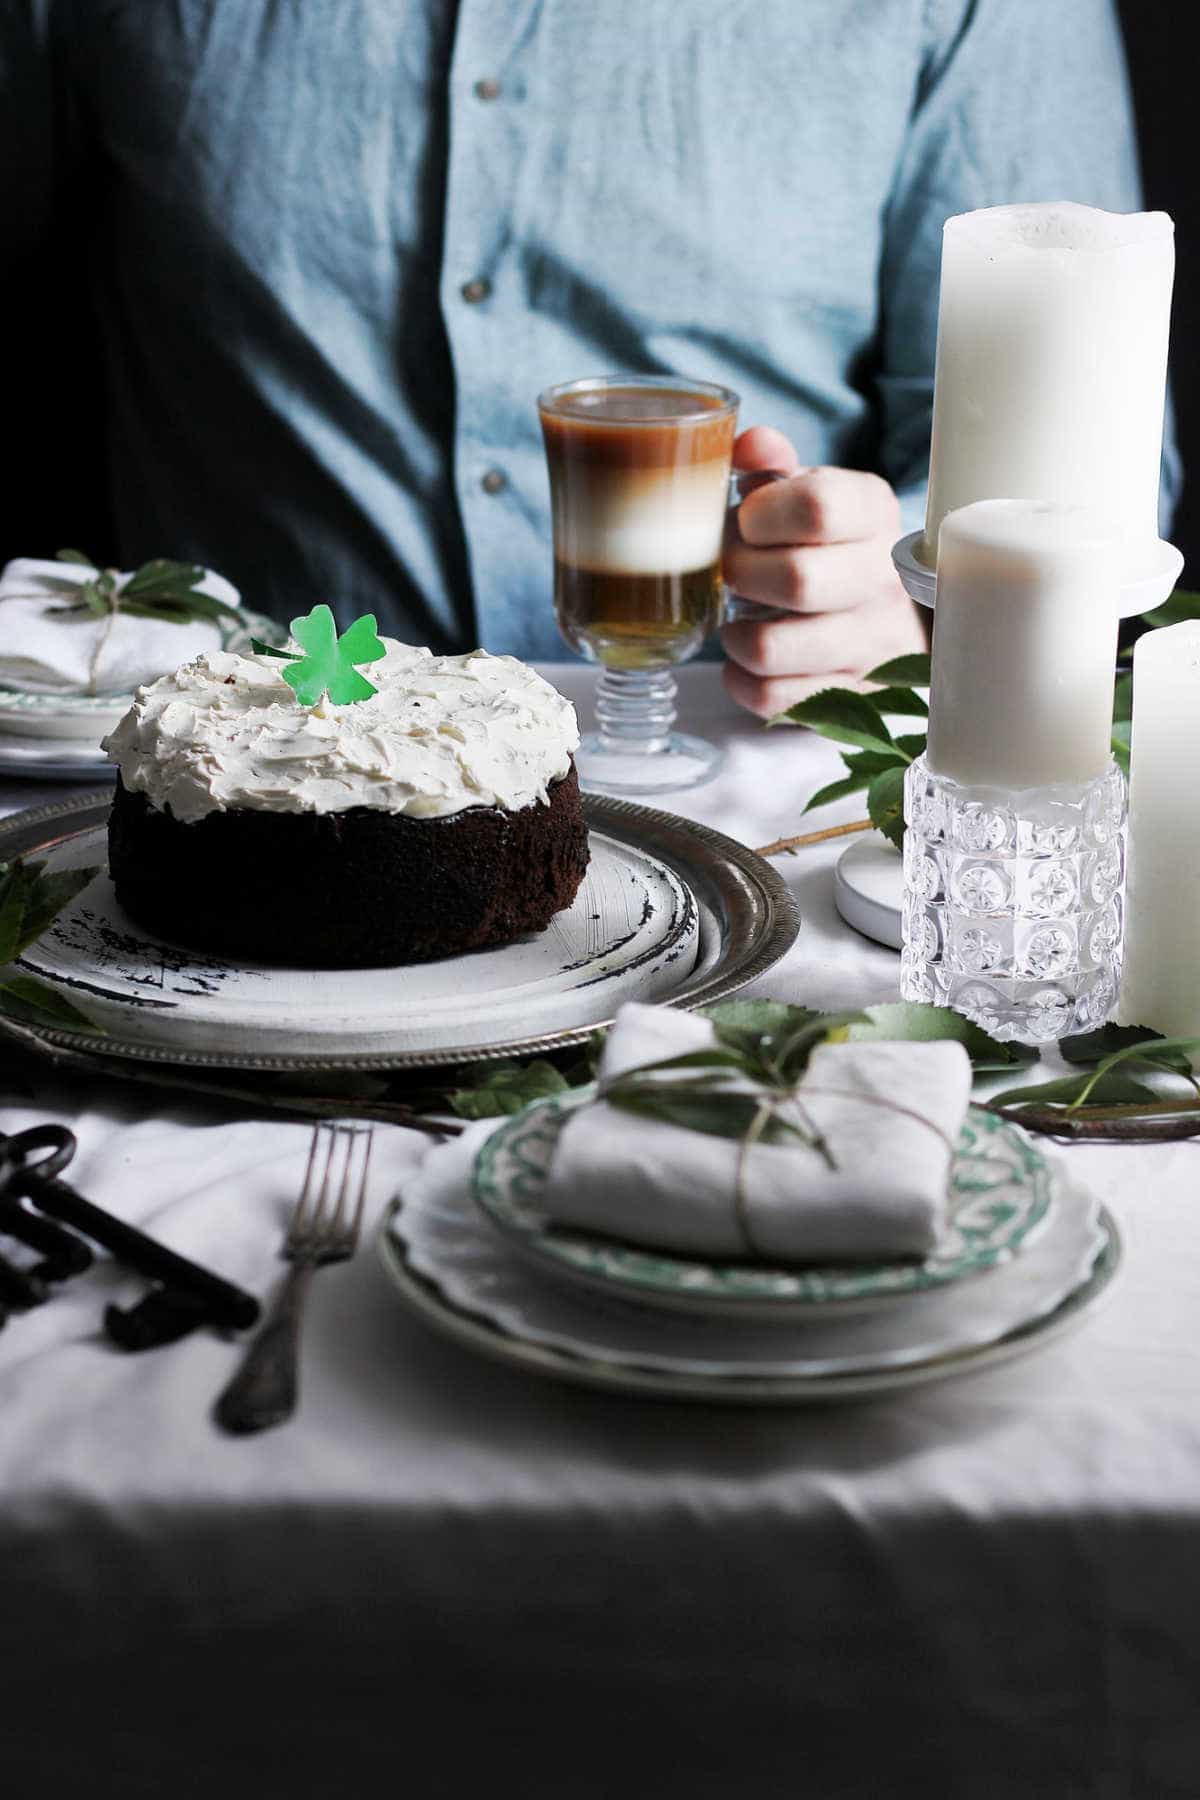 A person at a table with cake and irish coffee.